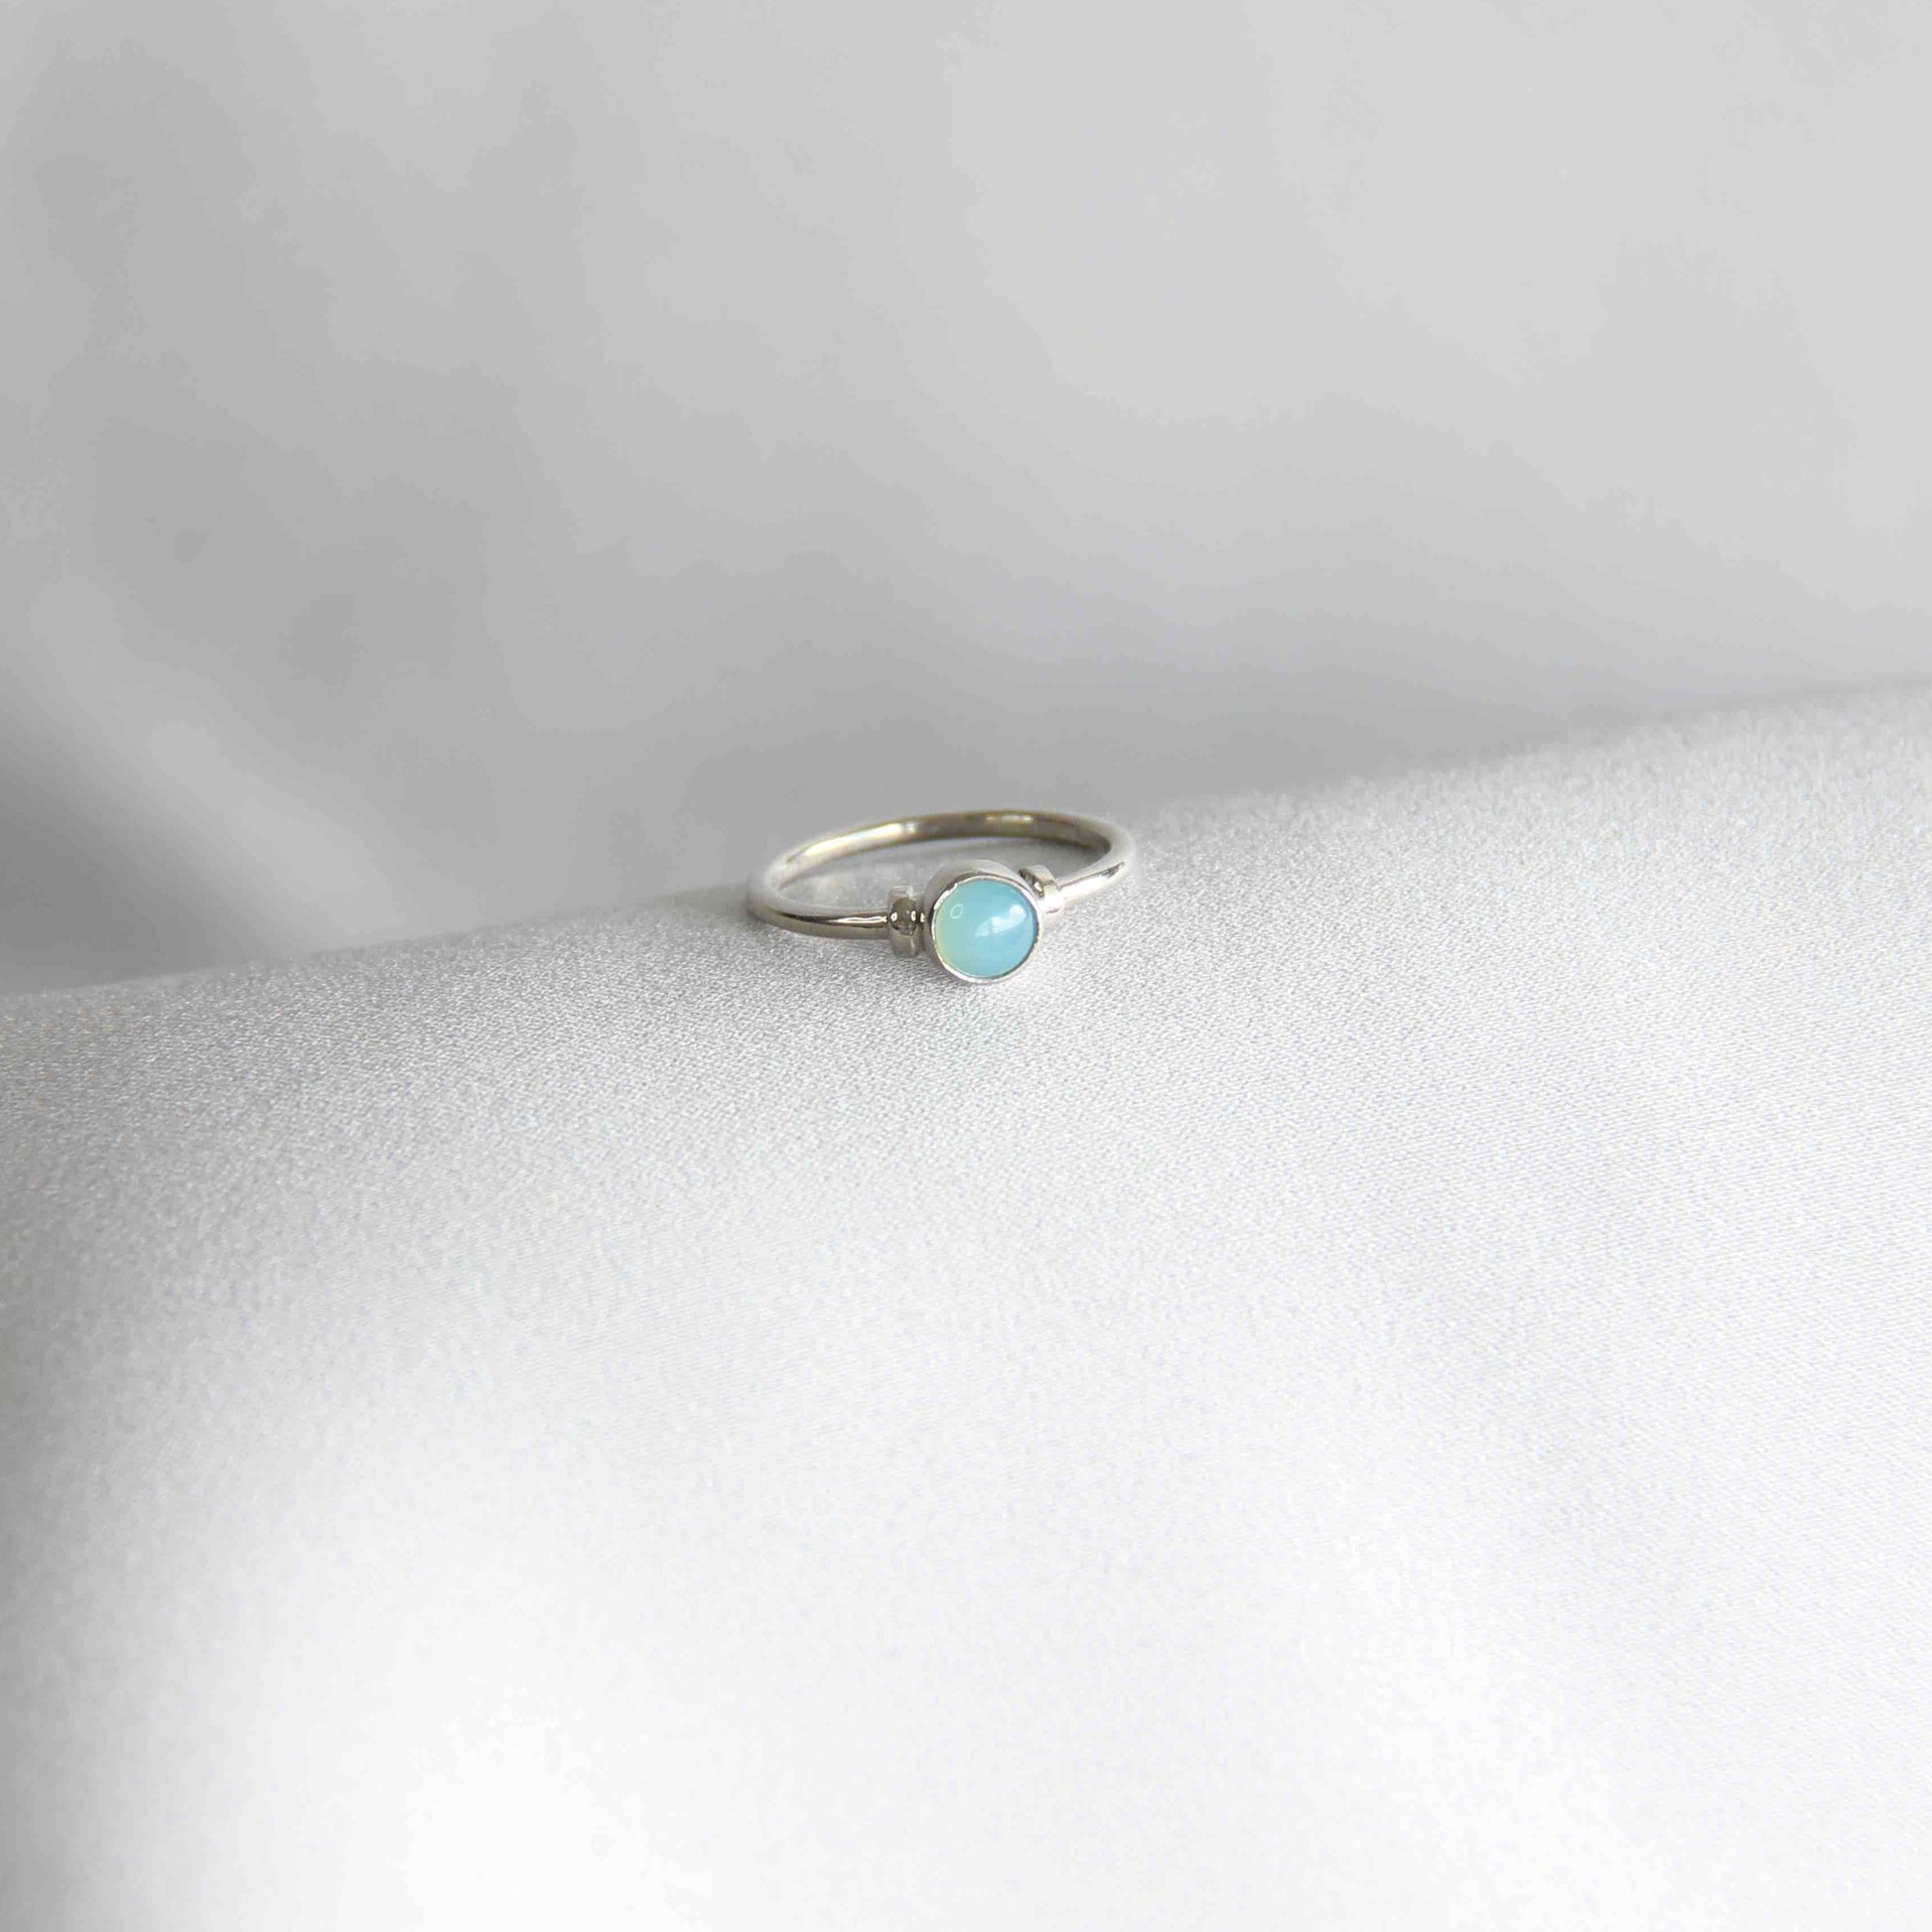 Chalcedony Ring, Chalcedony Jewelry, Gemstone Rings, Sterling Silver Jewelry, Zirconia Rings, Silver Rings for Women